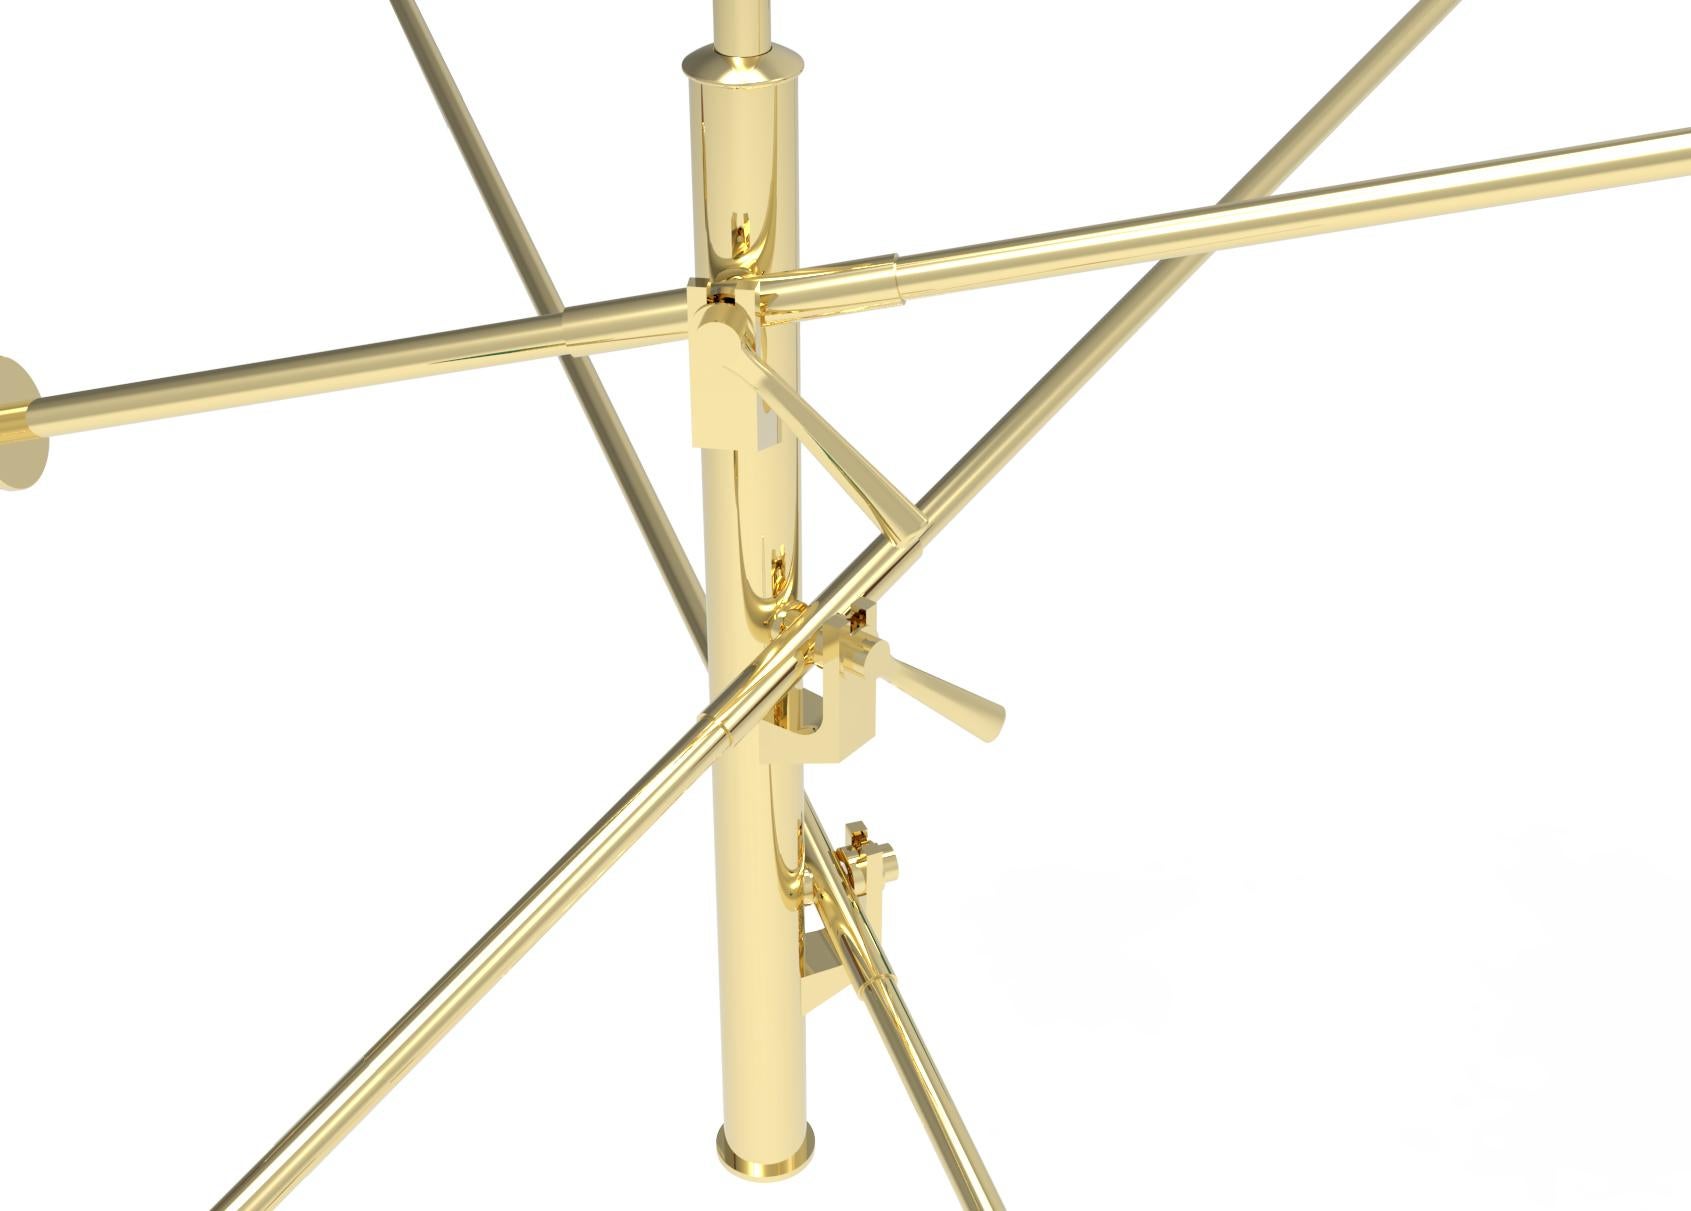 Icon of Arredoluce, symbol of an era and source of inspiration for many objects to follow over time, Triennale is perhaps the best known project by Angelo Lellii. Presented at the VII Milan Triennale in 1947, it is a pendant lamp with a brass linear